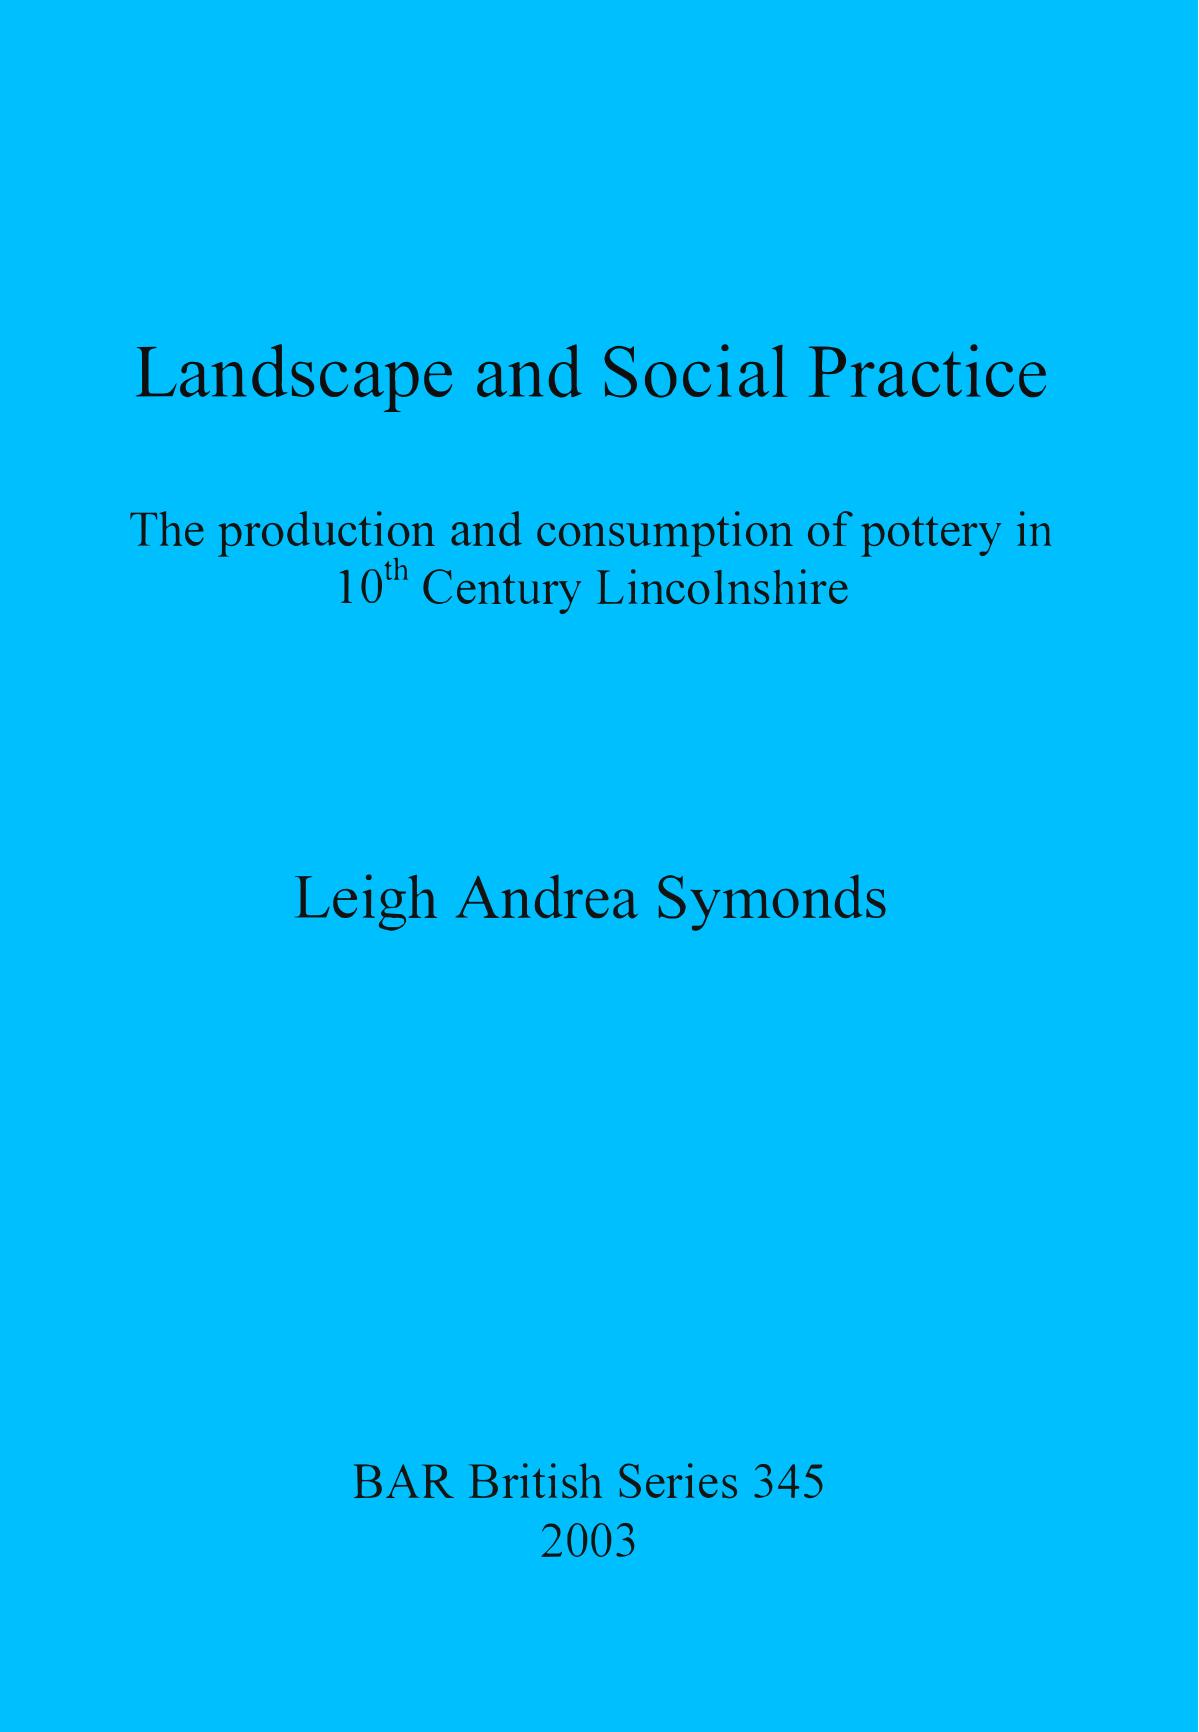 Landscape and Social Practice: The production and consumption of pottery in 10th Century Lincolnshire by Leigh Andrea Symonds